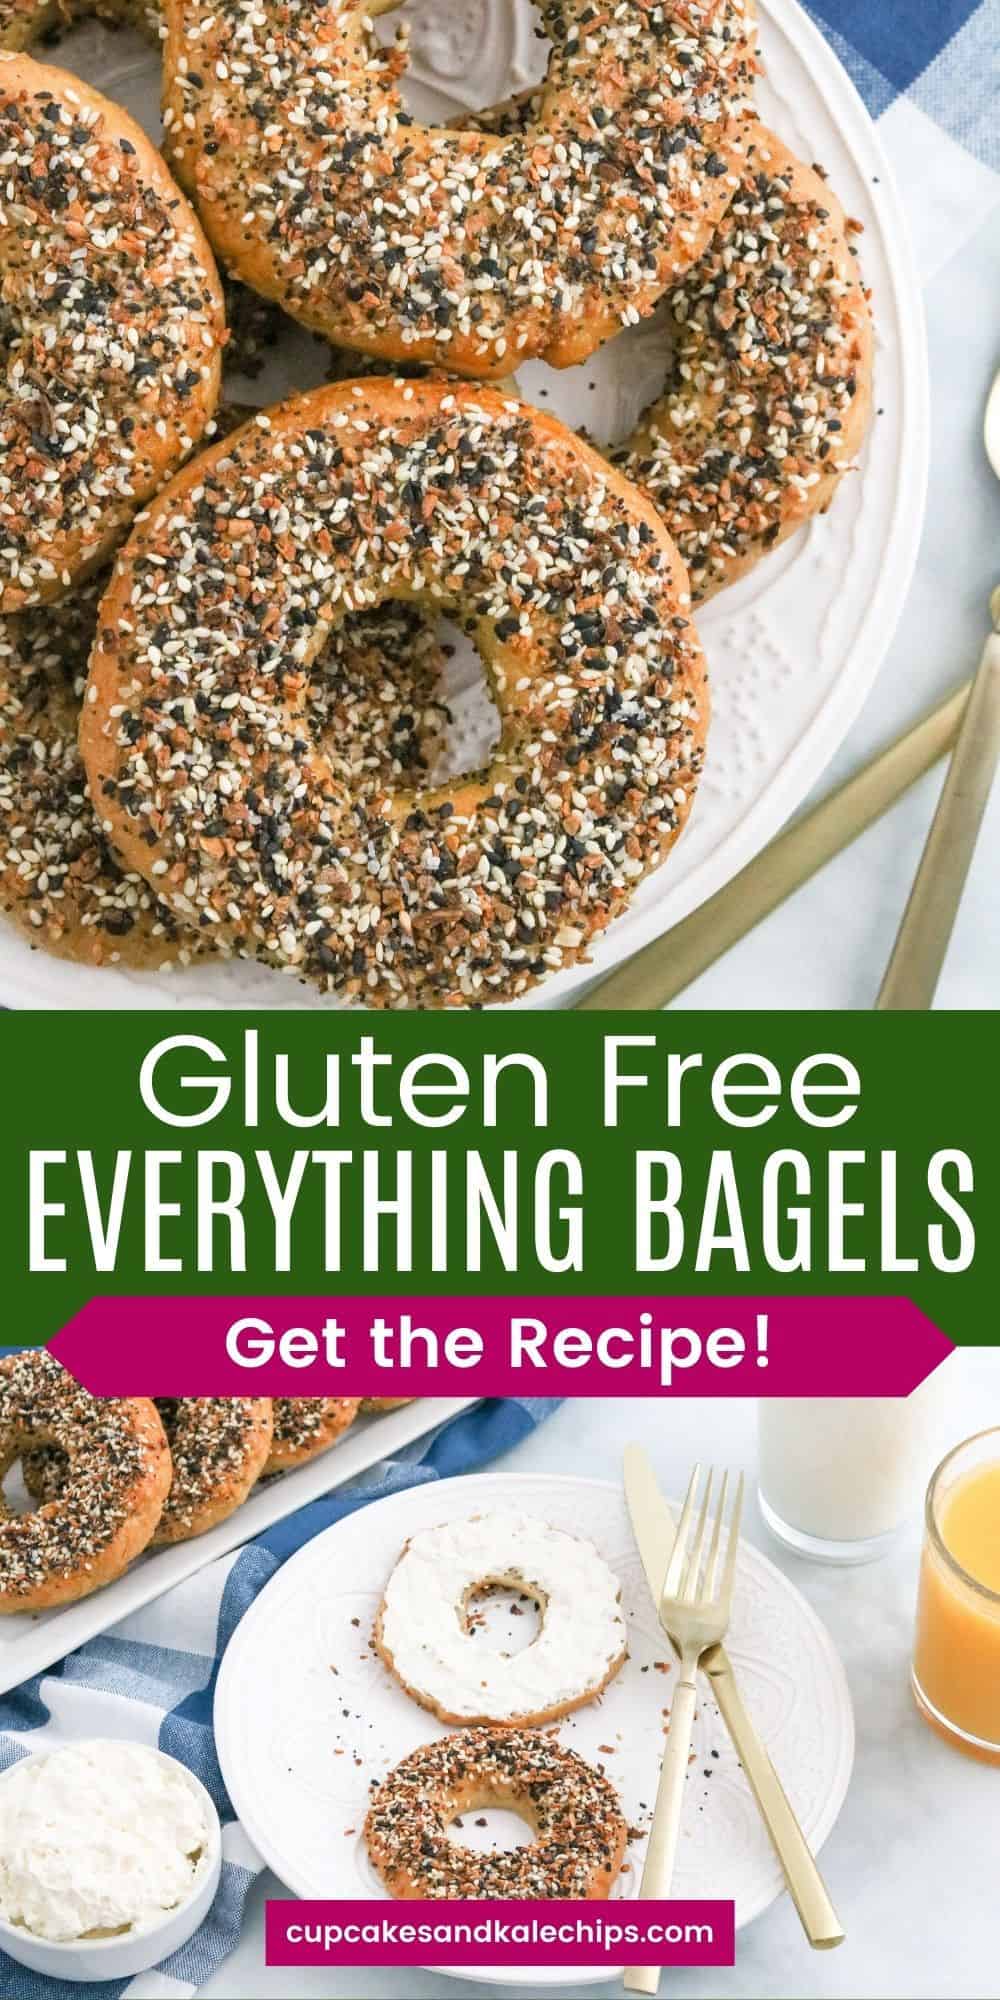 Homemade Gluten Free Everything Bagels | Cupcakes & Kale Chips